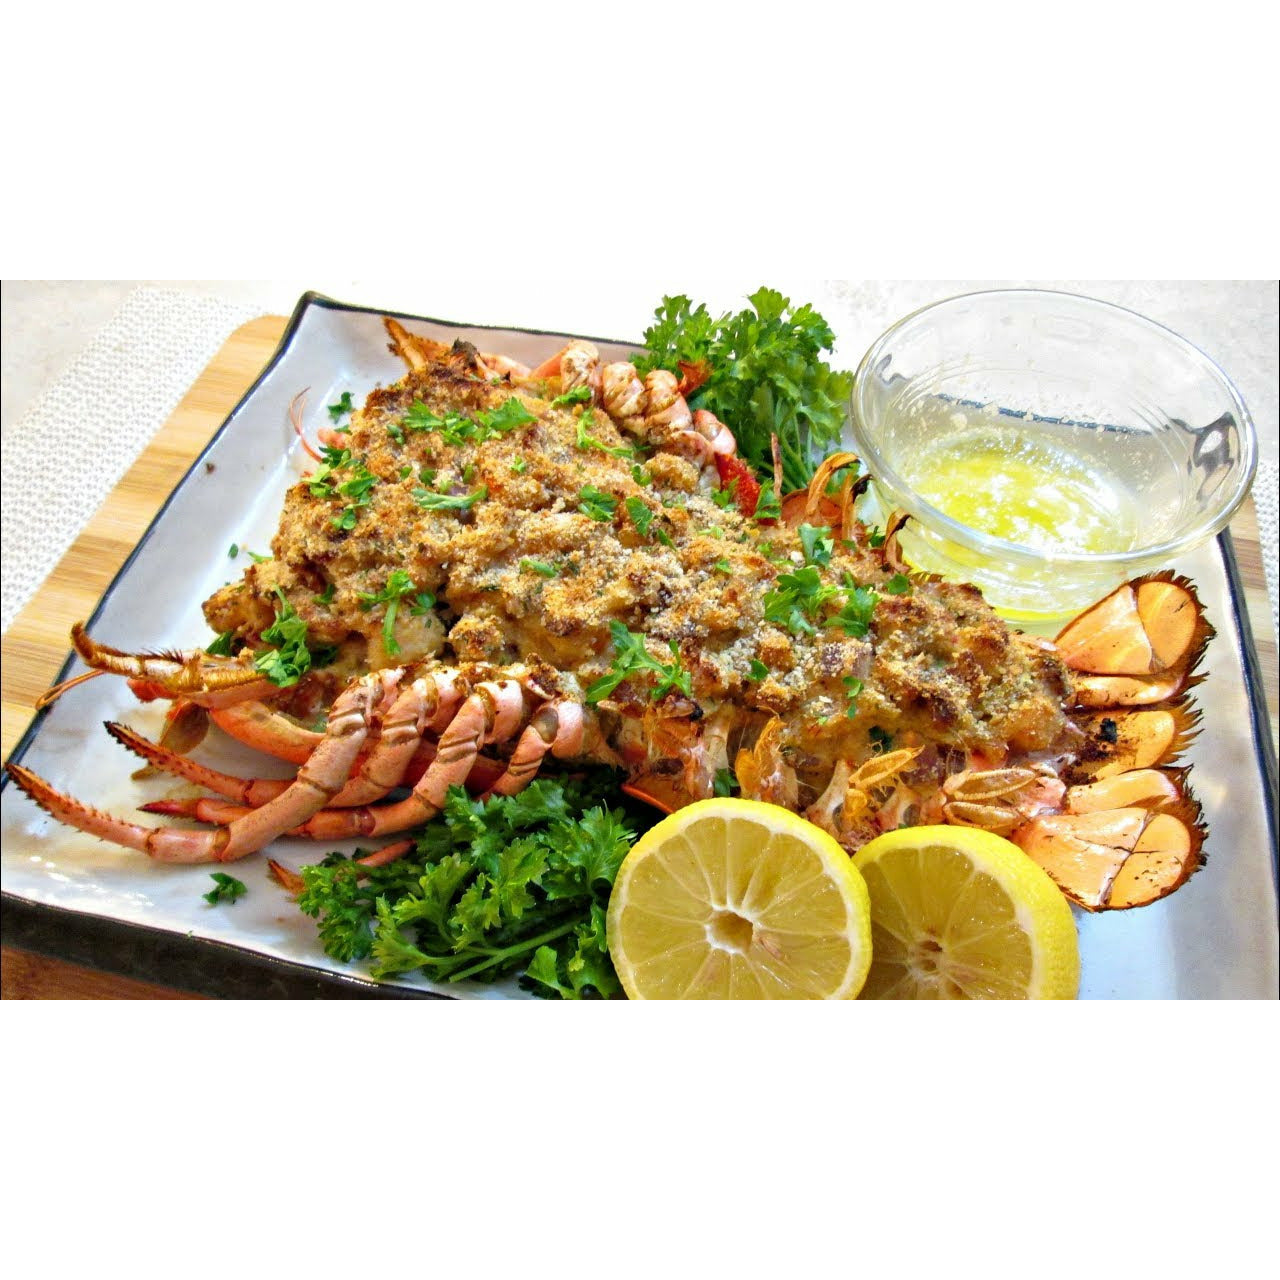 Baked Crabmeat Stuffed Maine Lobster (2lbs)